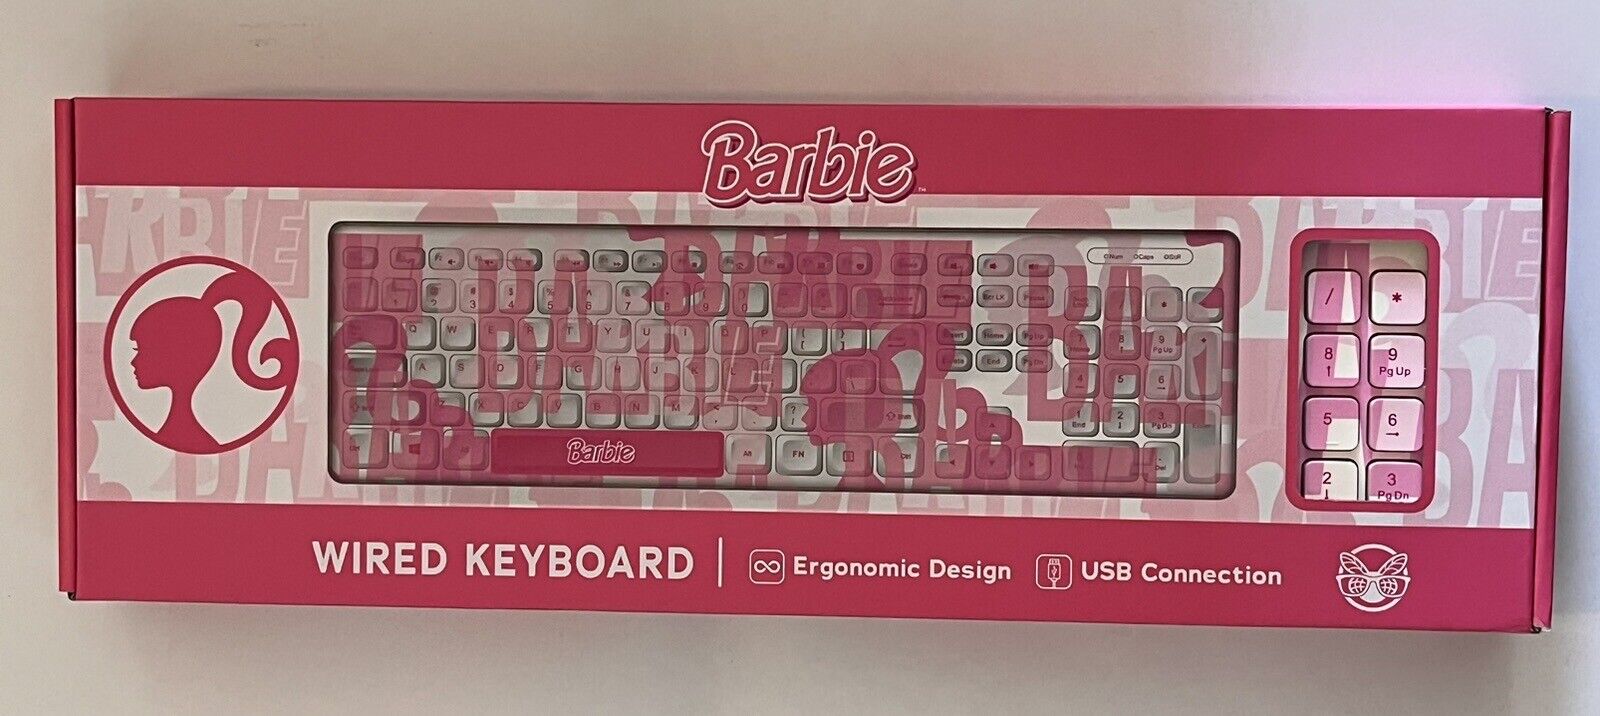 Barbie Wired Keyboard Culturefly, USB Connection, Ergonomic Design  Pink NEW